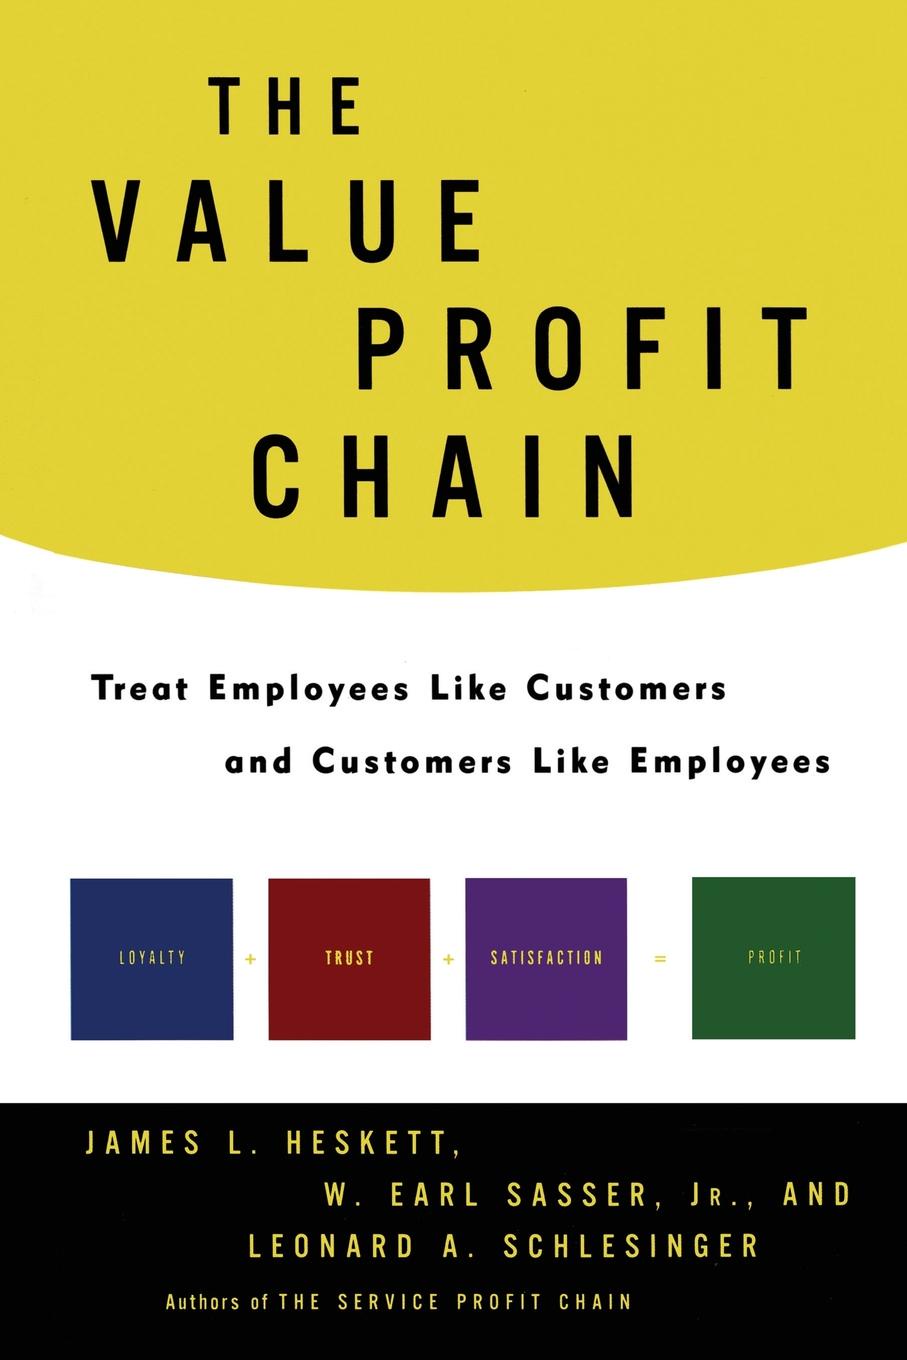 The Value Profit Chain. Treat Employees Like Customers and Customers Like Employees